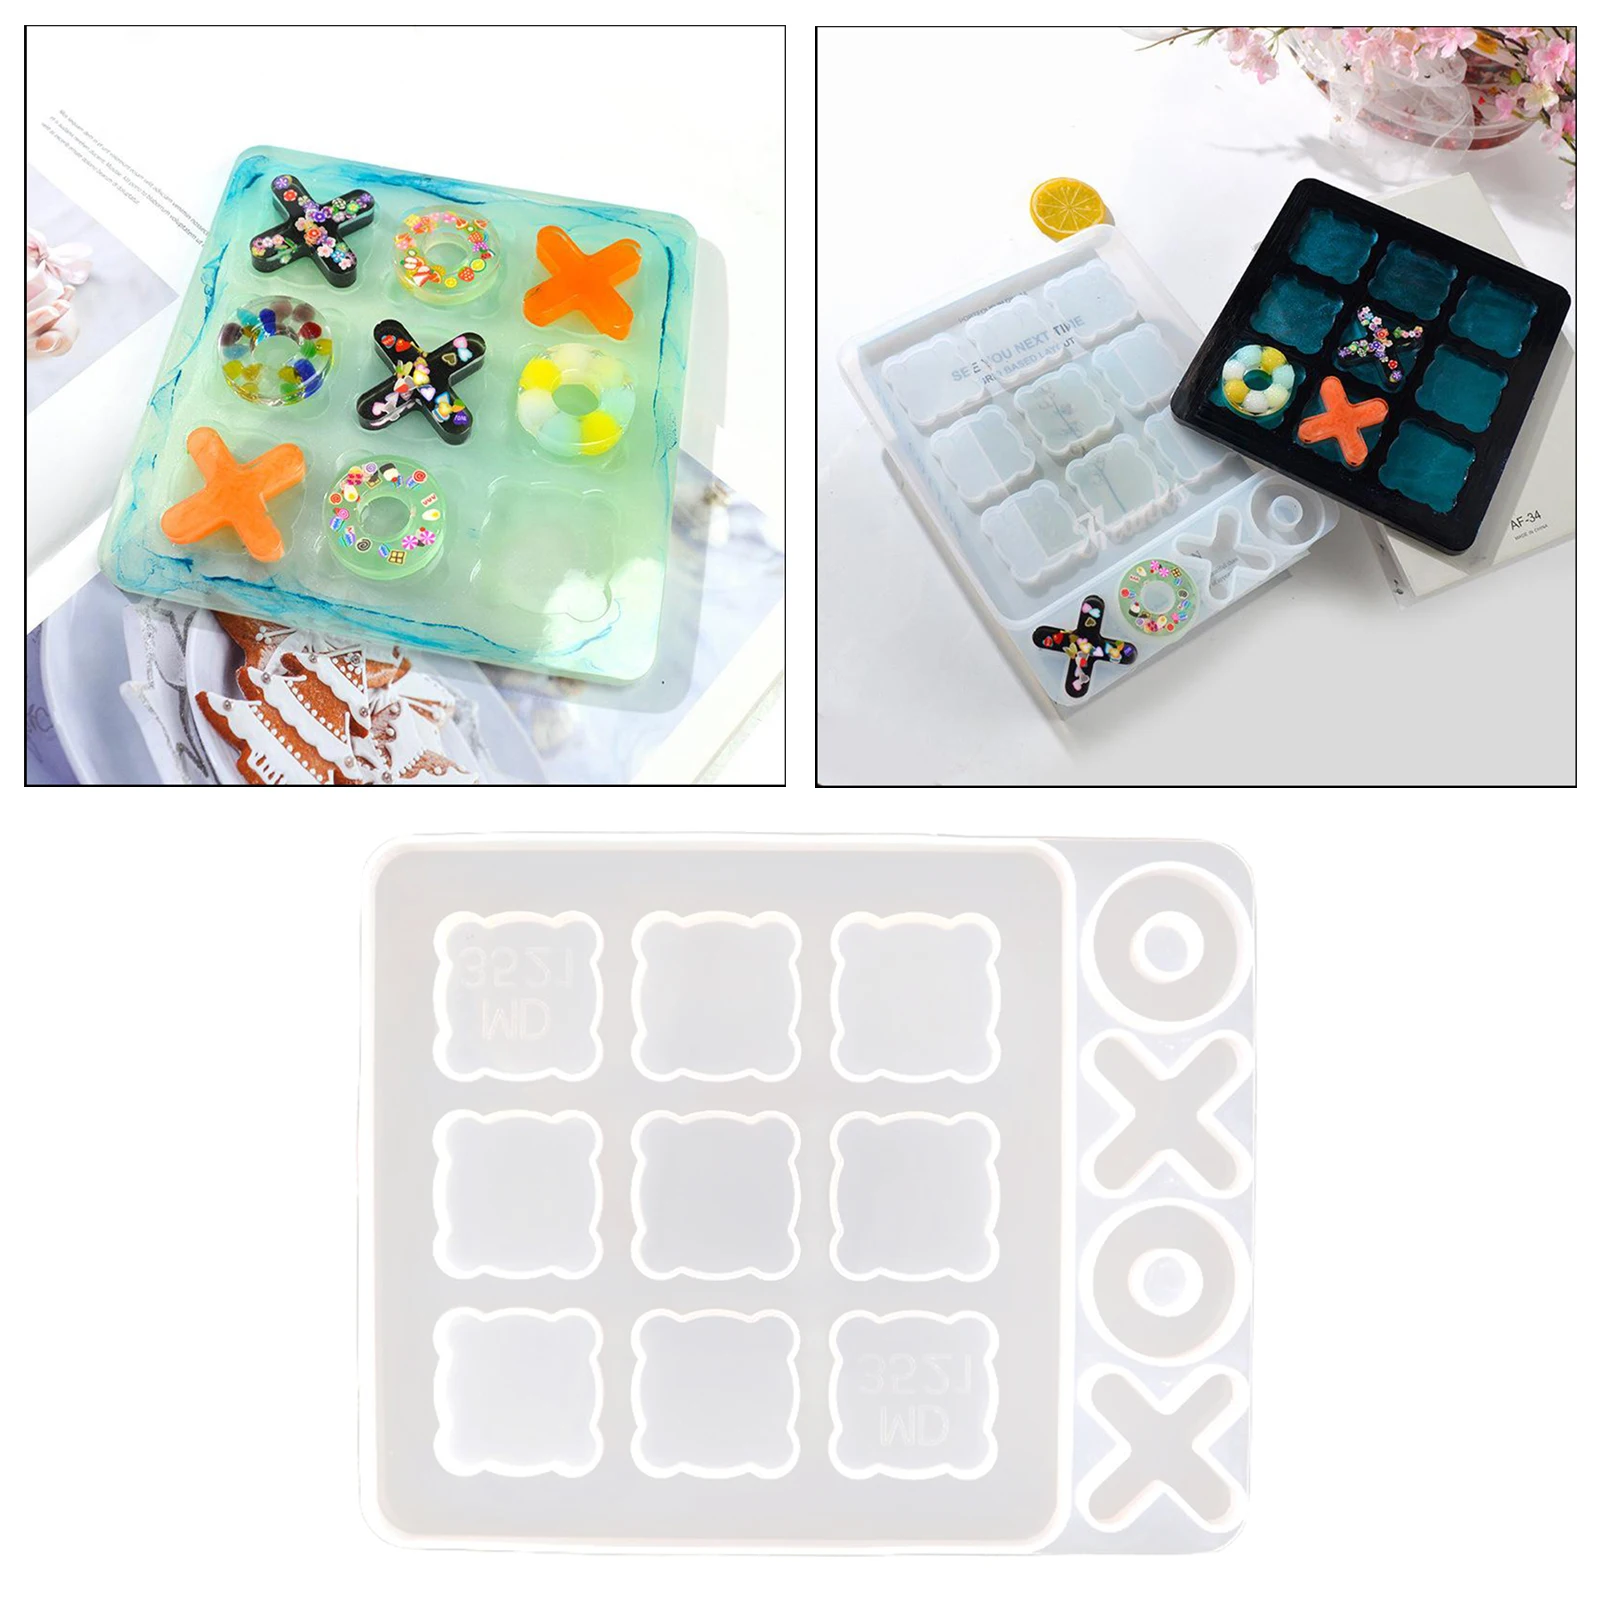 DIY Tic-Tac-Toe Game Board Silicone Mold Casting Mould Craft 243x193x11mm for Concrete,Cement